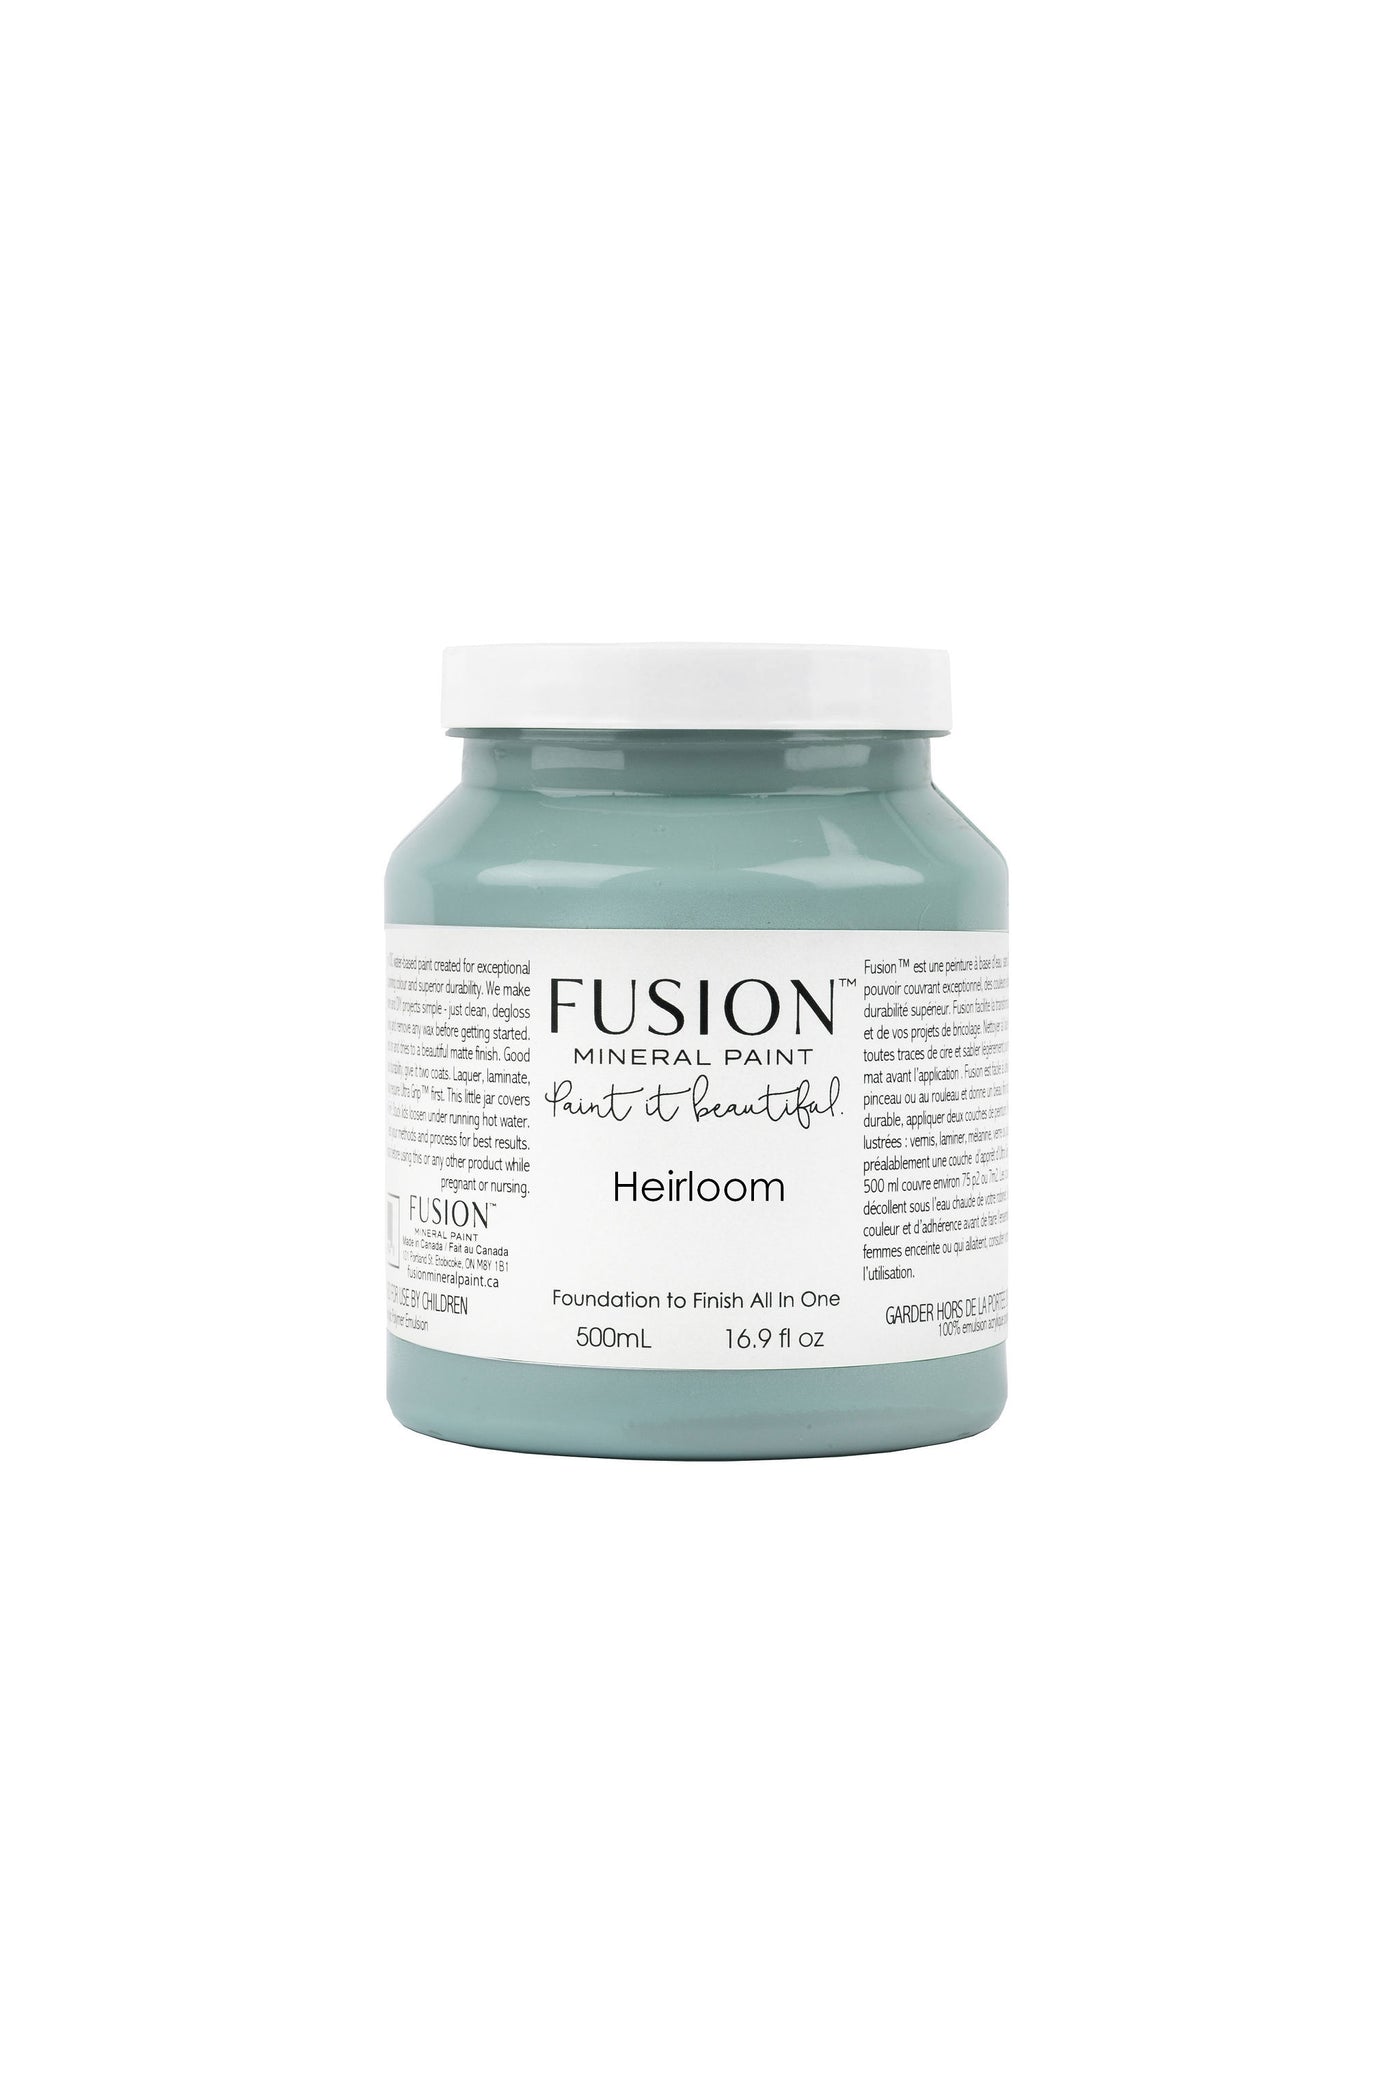 HEIRLOOM - FUSION MINERAL PAINT